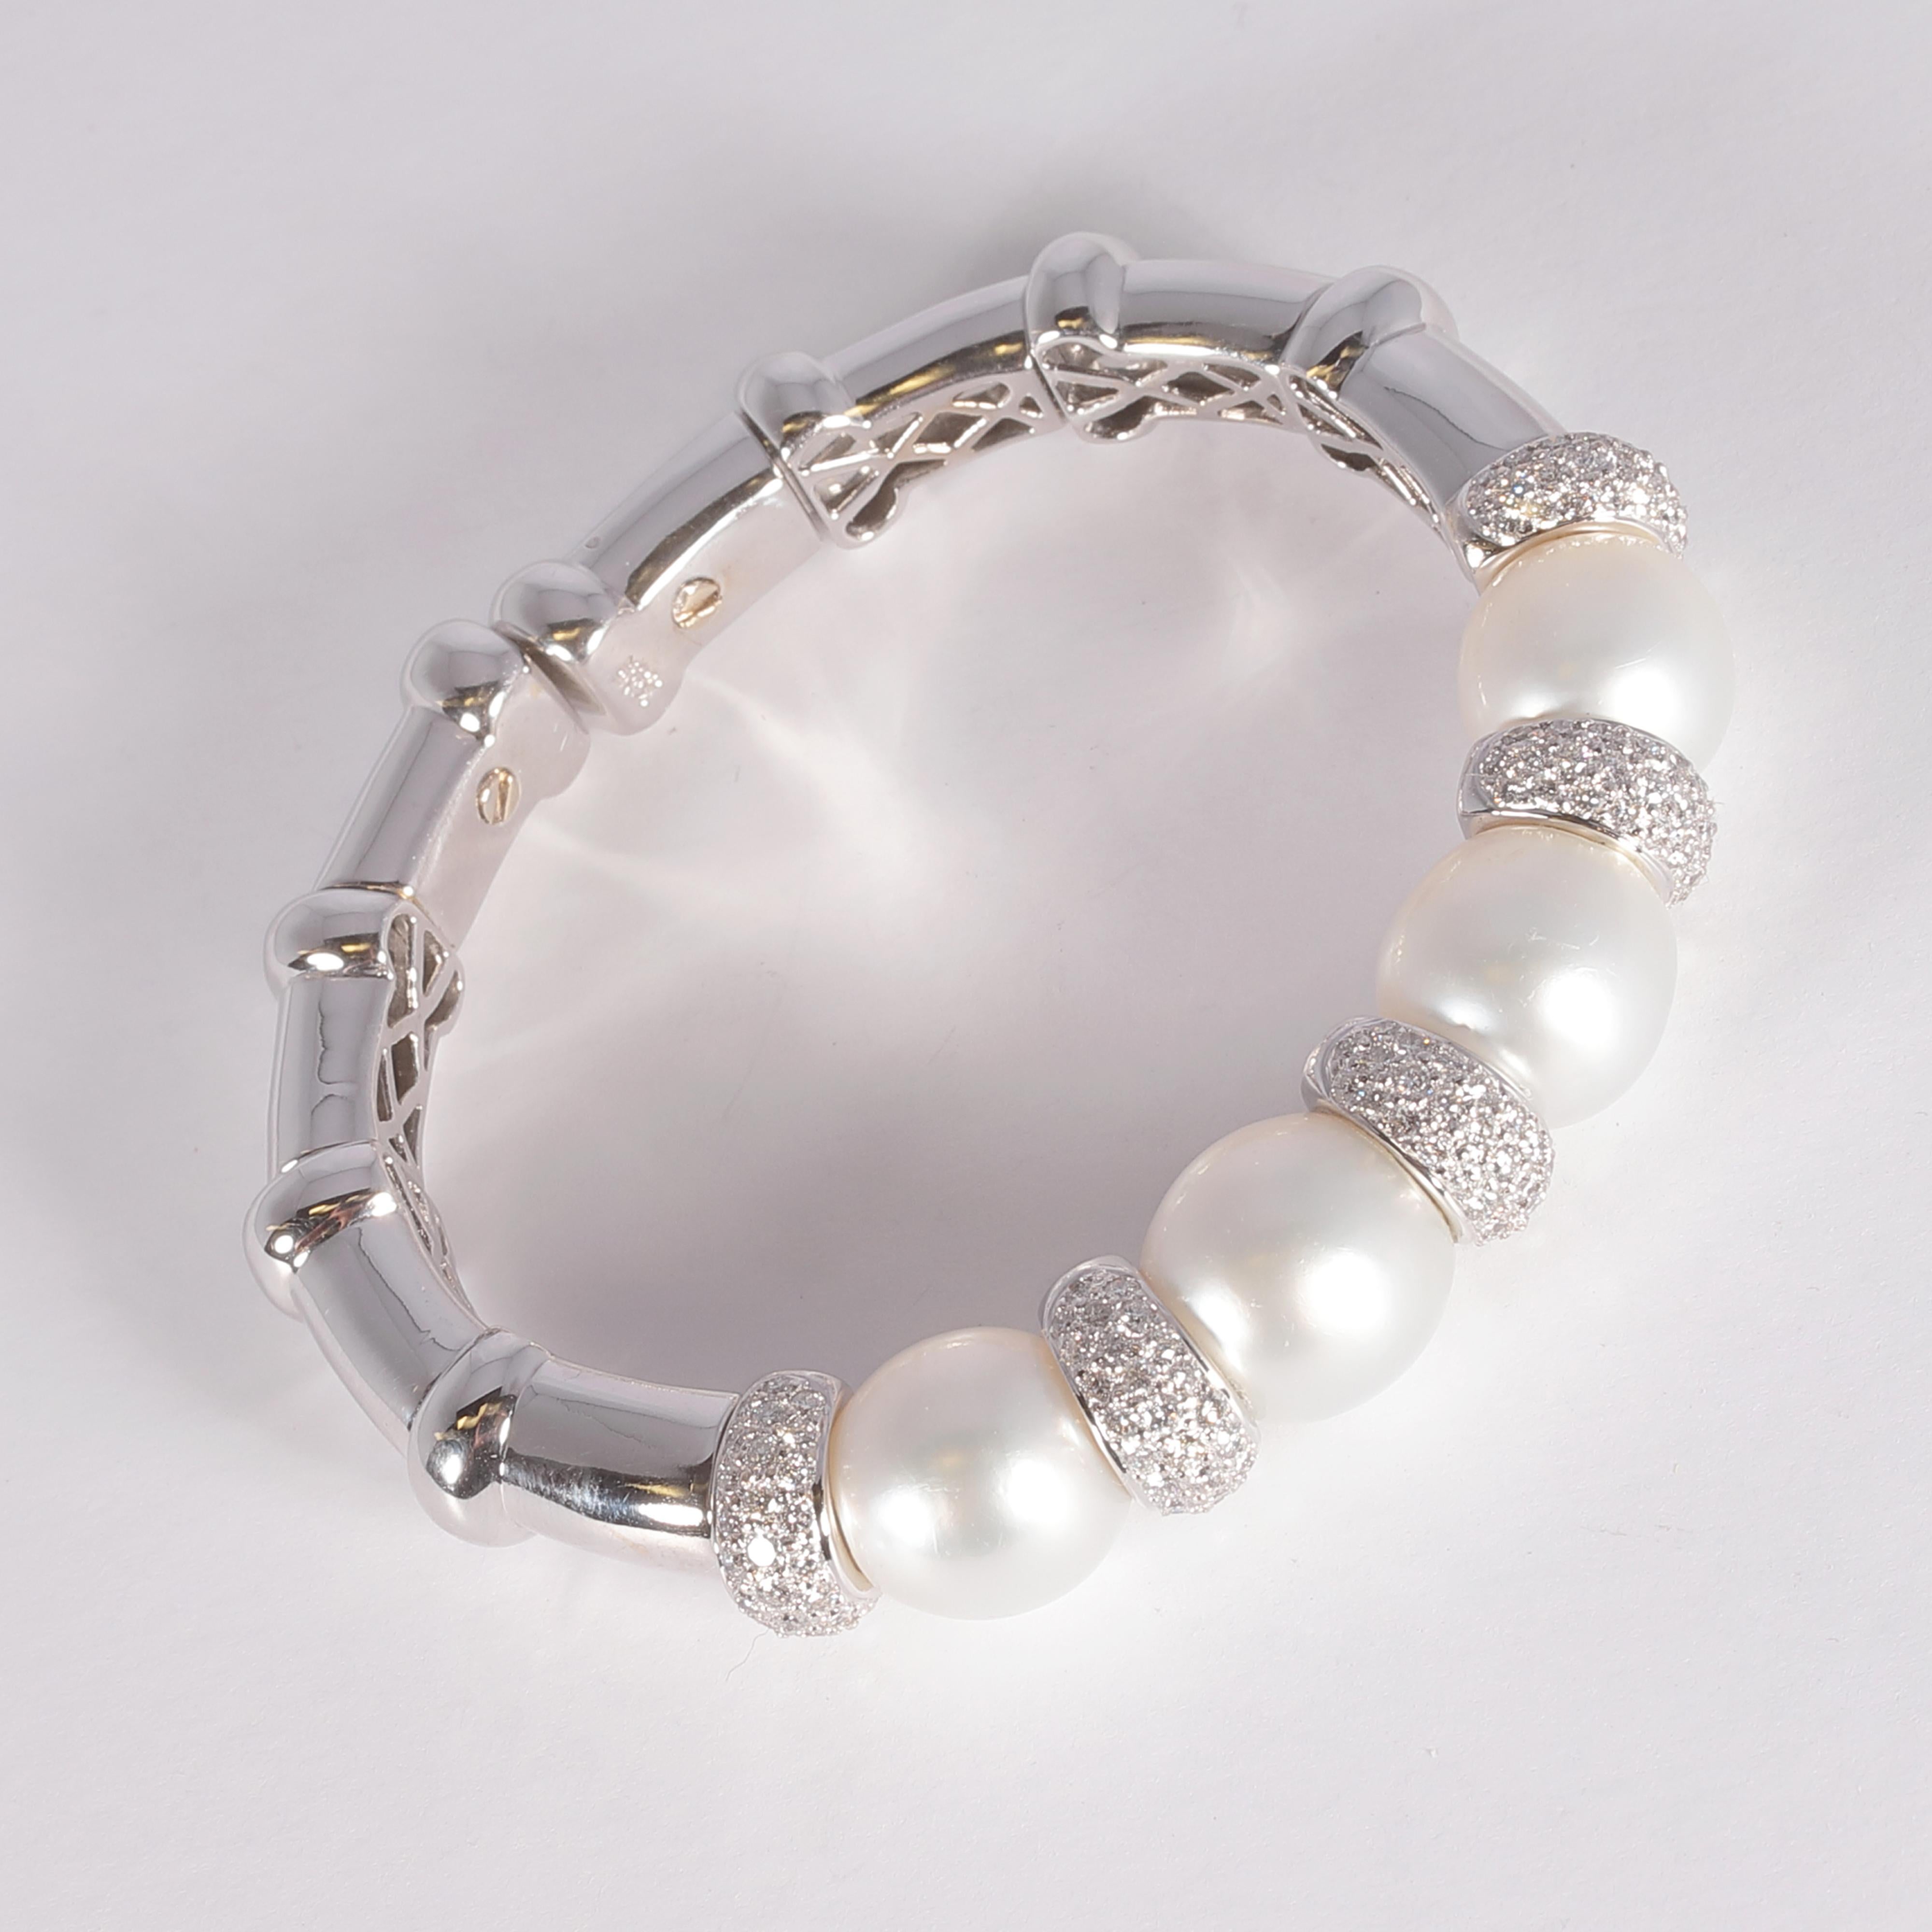 A timeless classic, this cuff is in 18 karat white gold and supports four South Sea pearls, measuring approximately 12.10 mm to 12.30 mm and features diamond rondells with a stated total weight of 3.21 carats.  It is so comfortable and easy to wear!